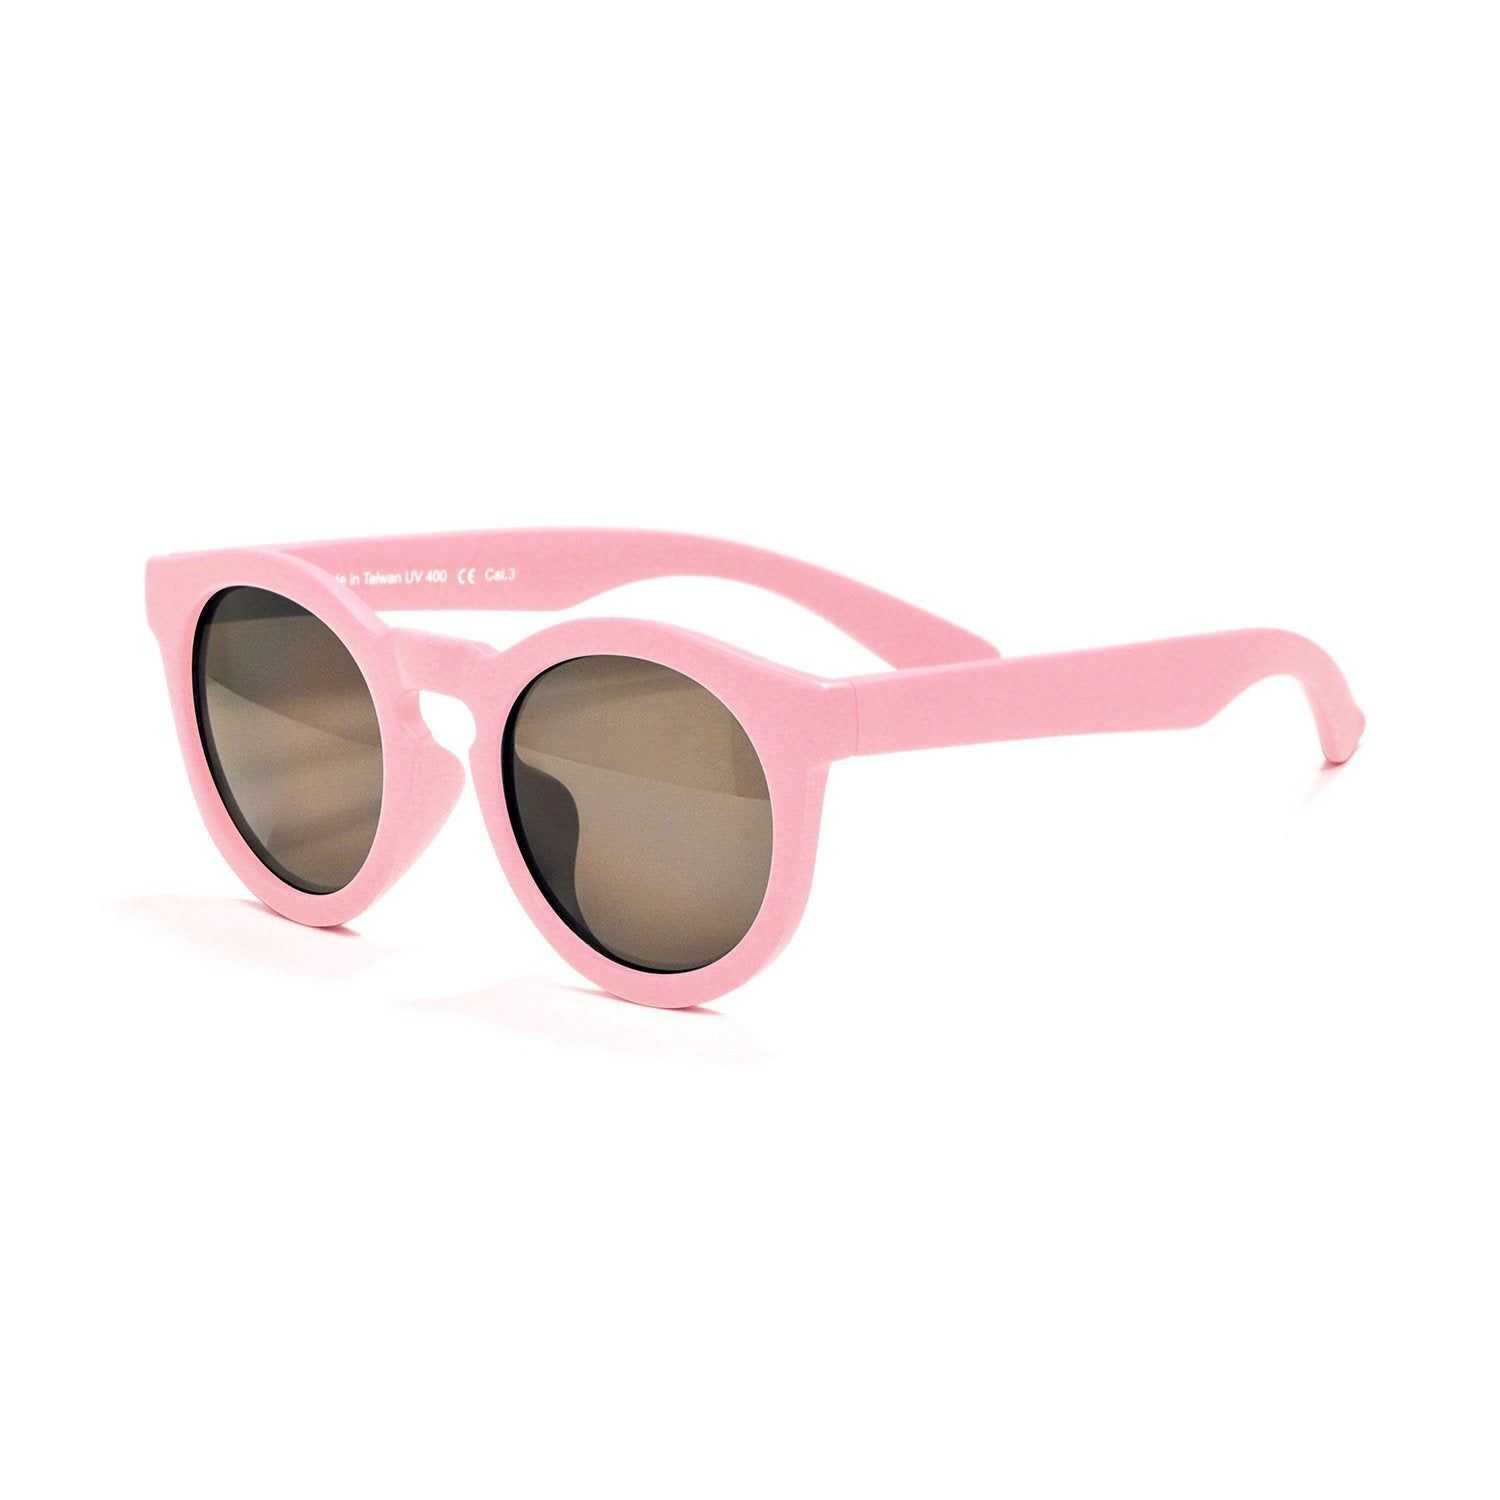 Dusty Rose Unbreakable Sunglasses - Real Shades